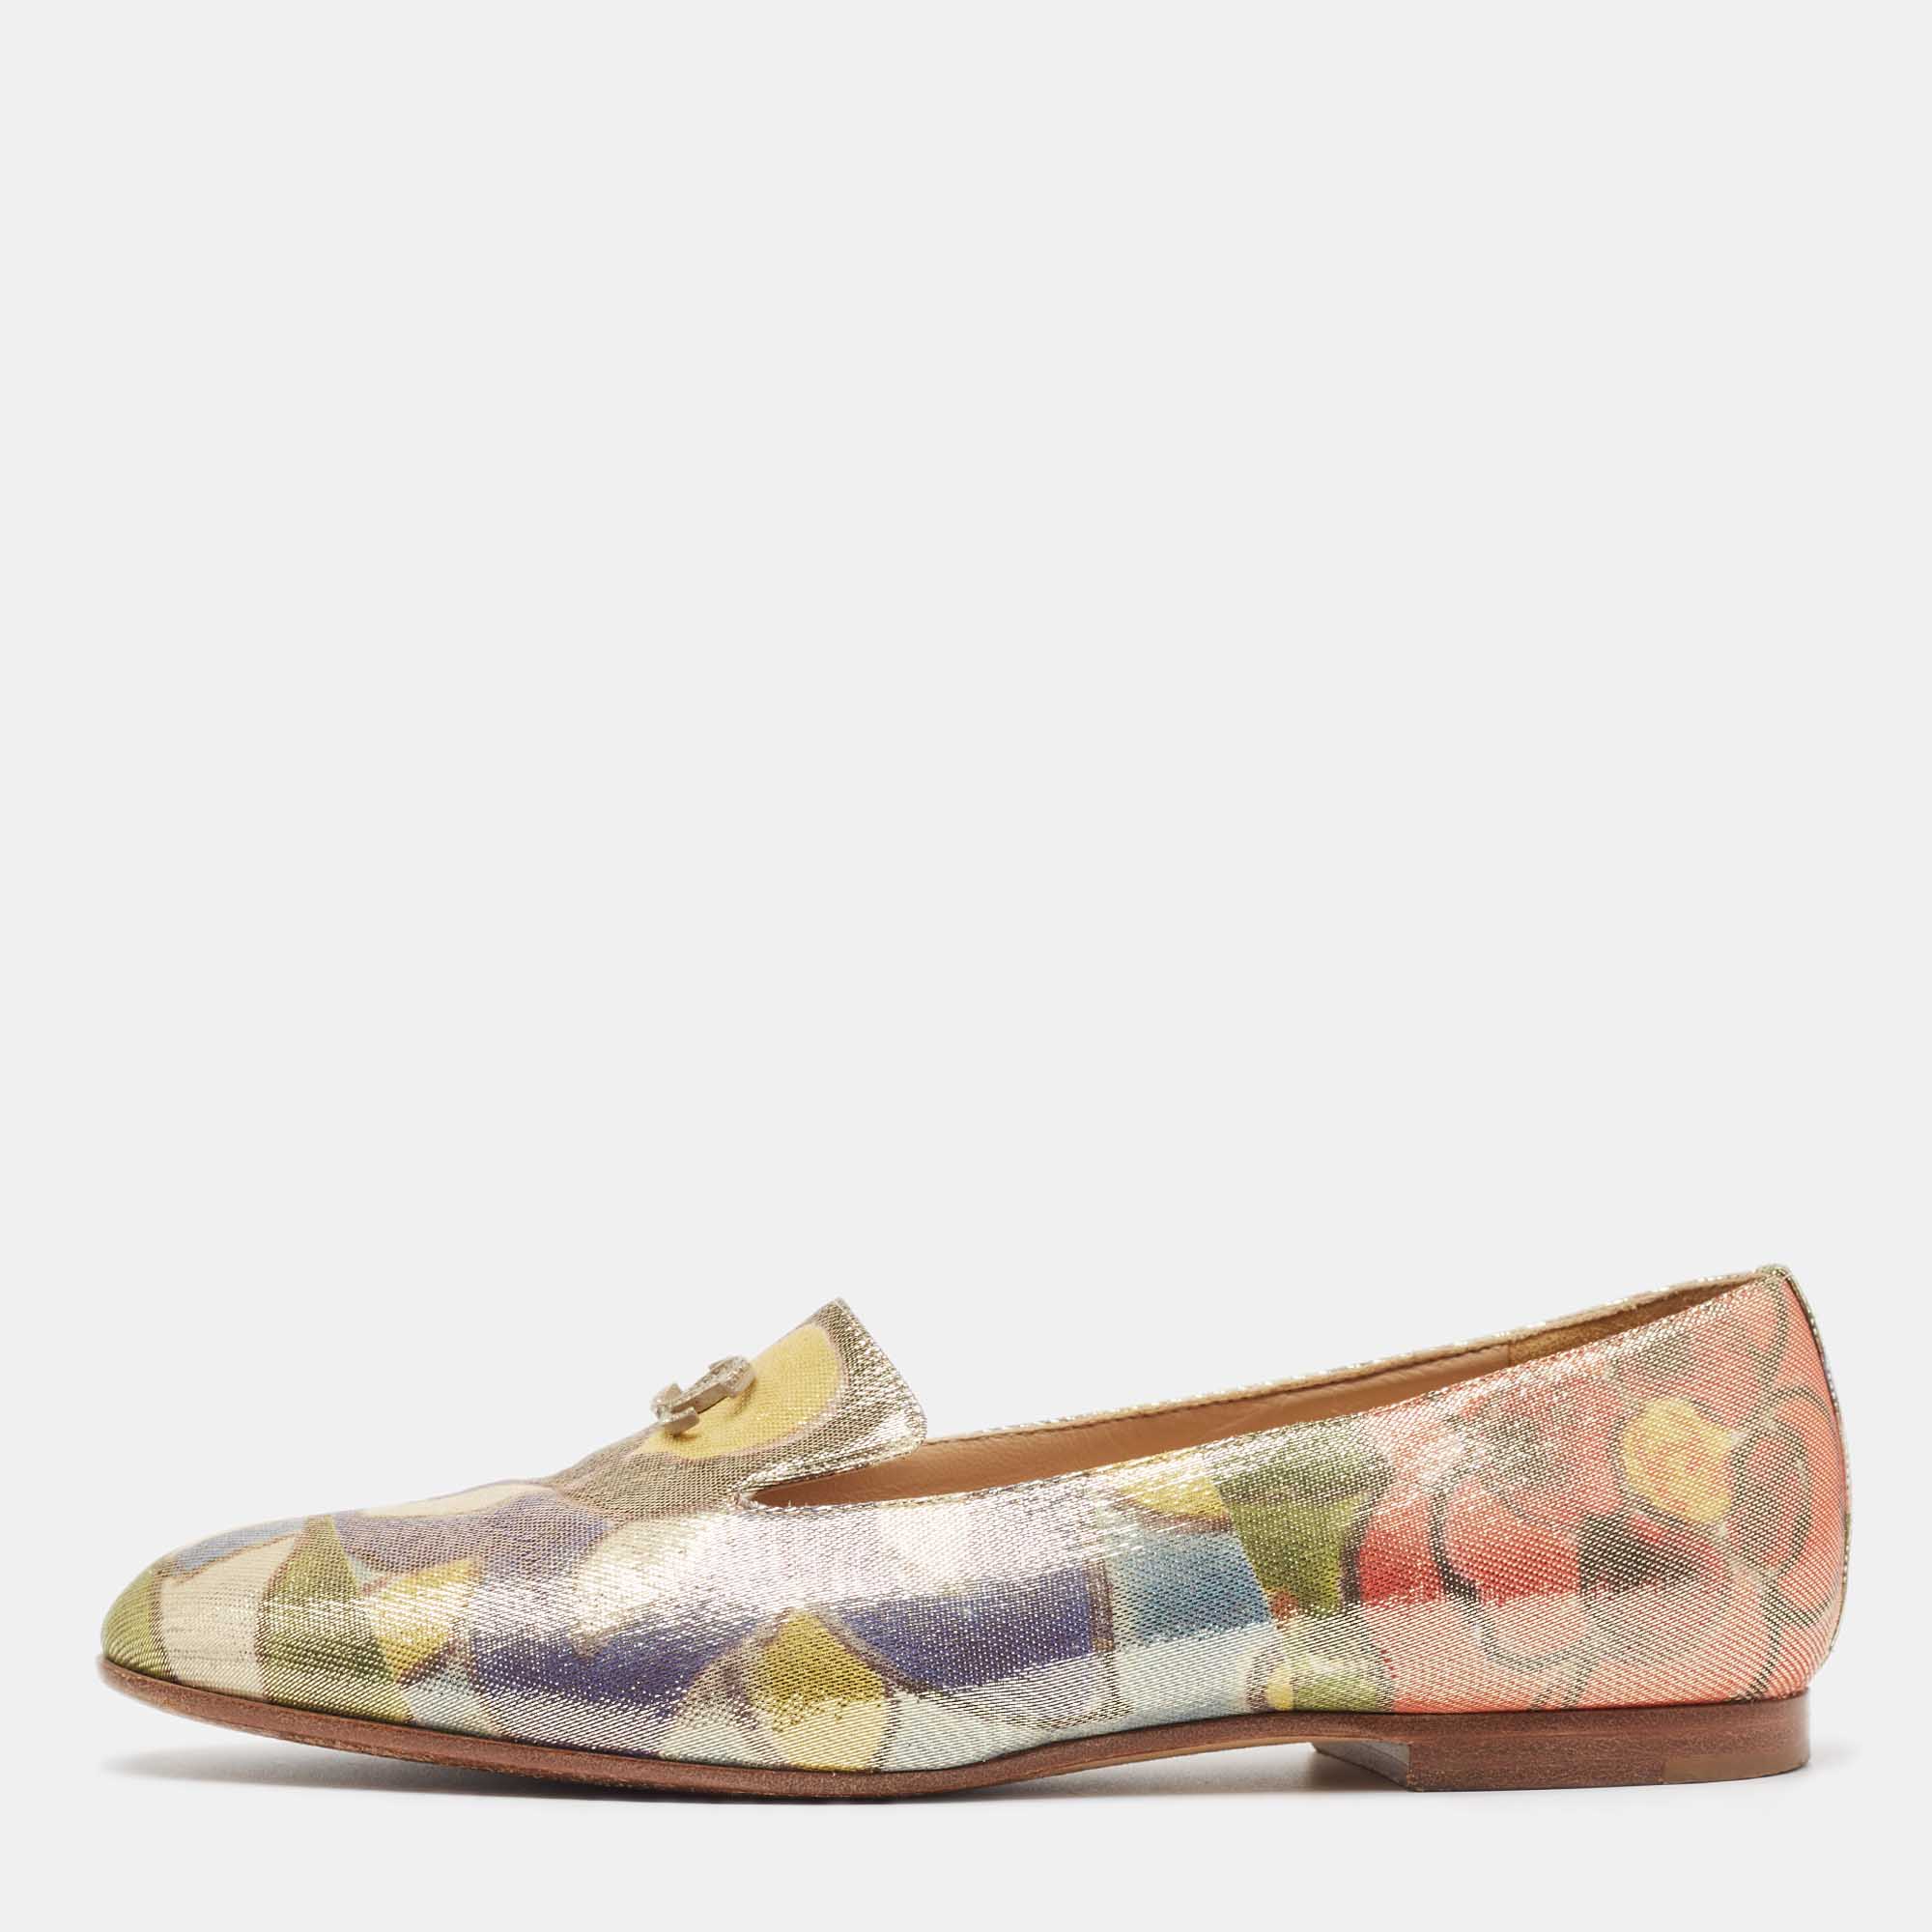 

Chanel Multicolor Floral Print Glitter Lame Fabric CC Smoking Slippers Size